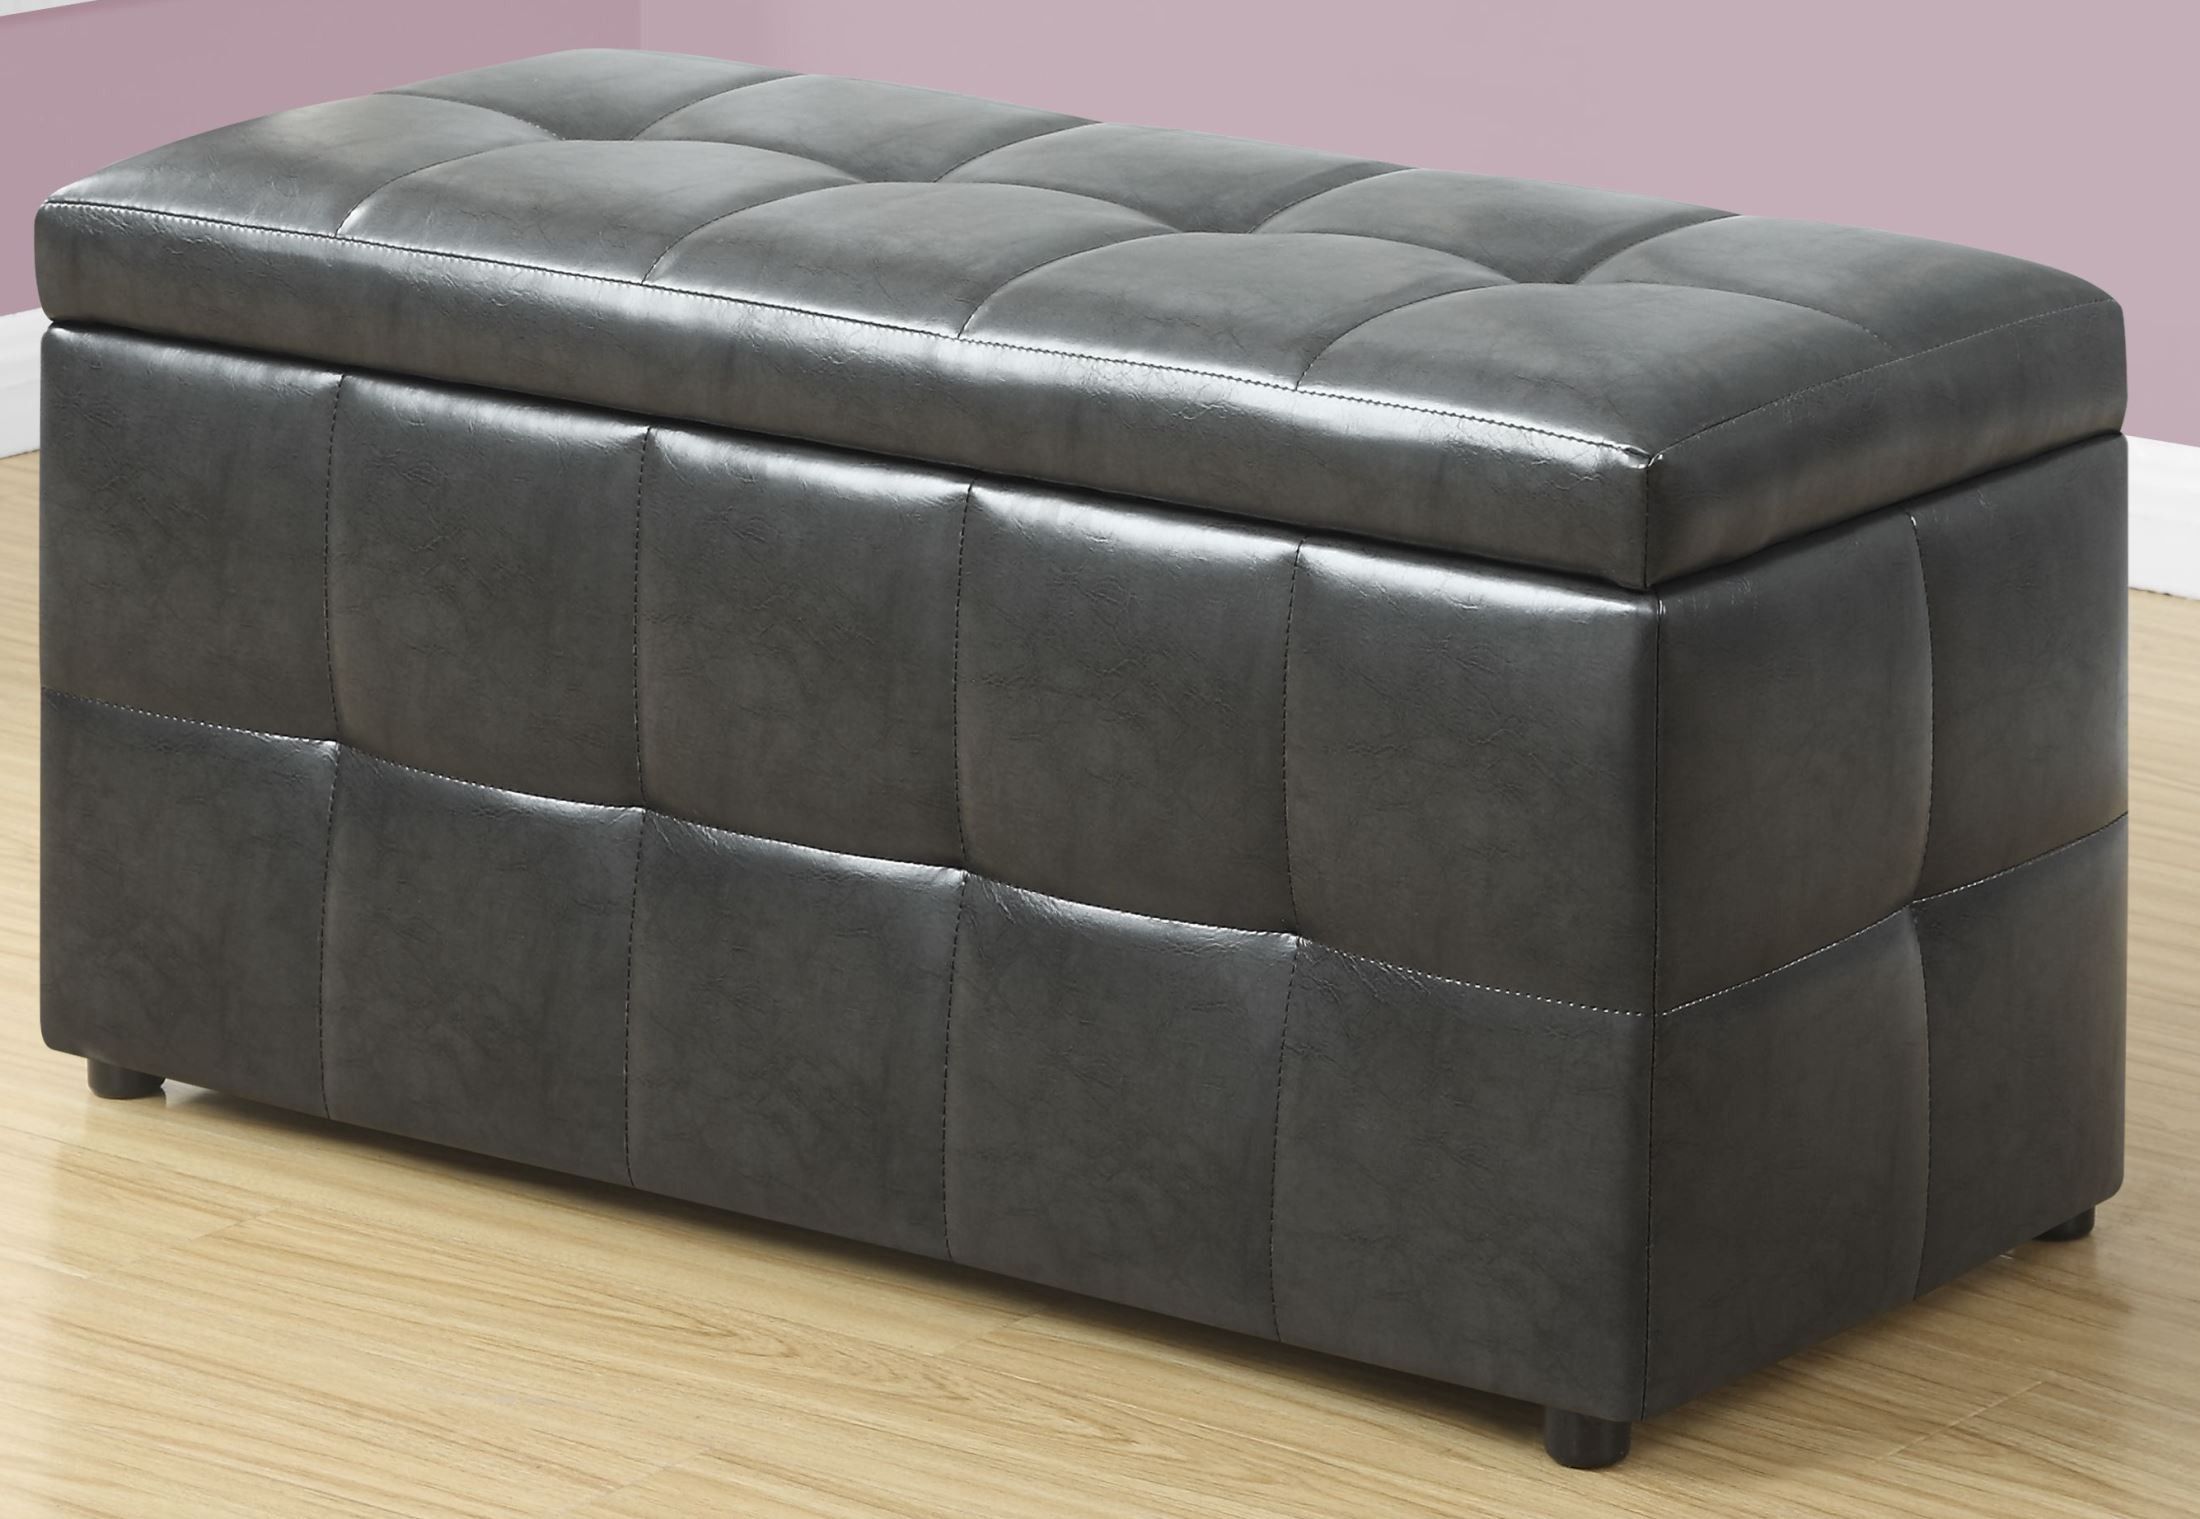 Charcoal Grey Leather Storage Ottoman, 8987, Monarch Intended For Medium Gray Leather Pouf Ottomans (View 11 of 20)